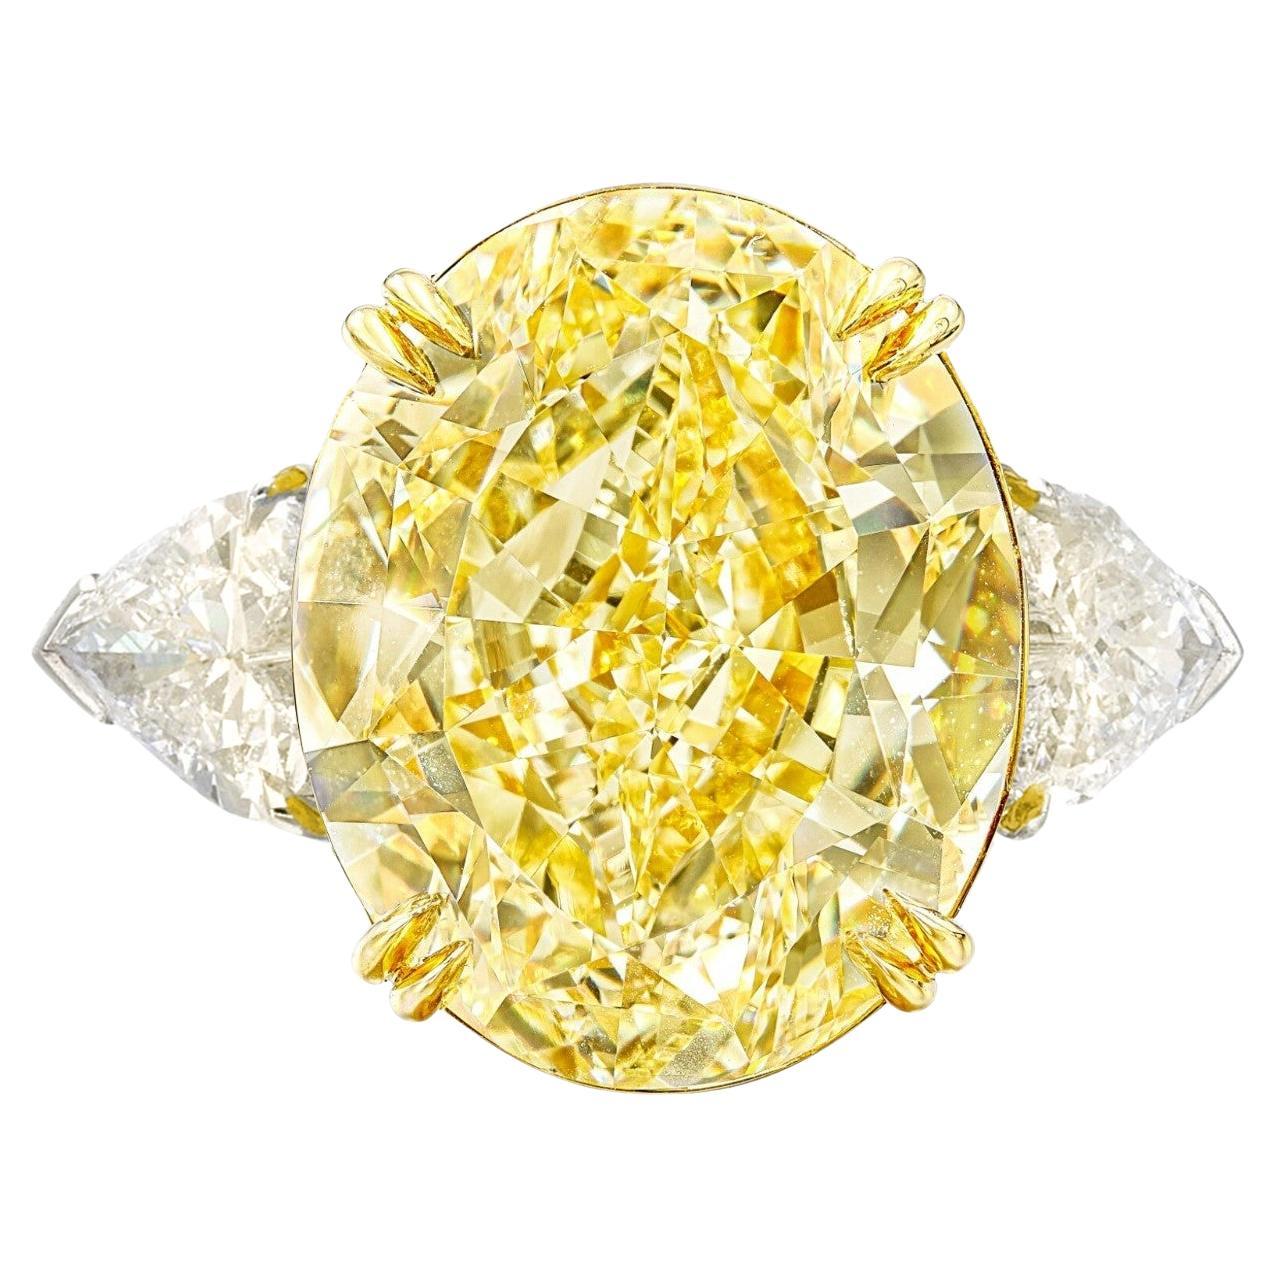 EXCEPTIONAL GIA Certified 5 Carat Flawless Fancy Yellow Diamond Ring For Sale